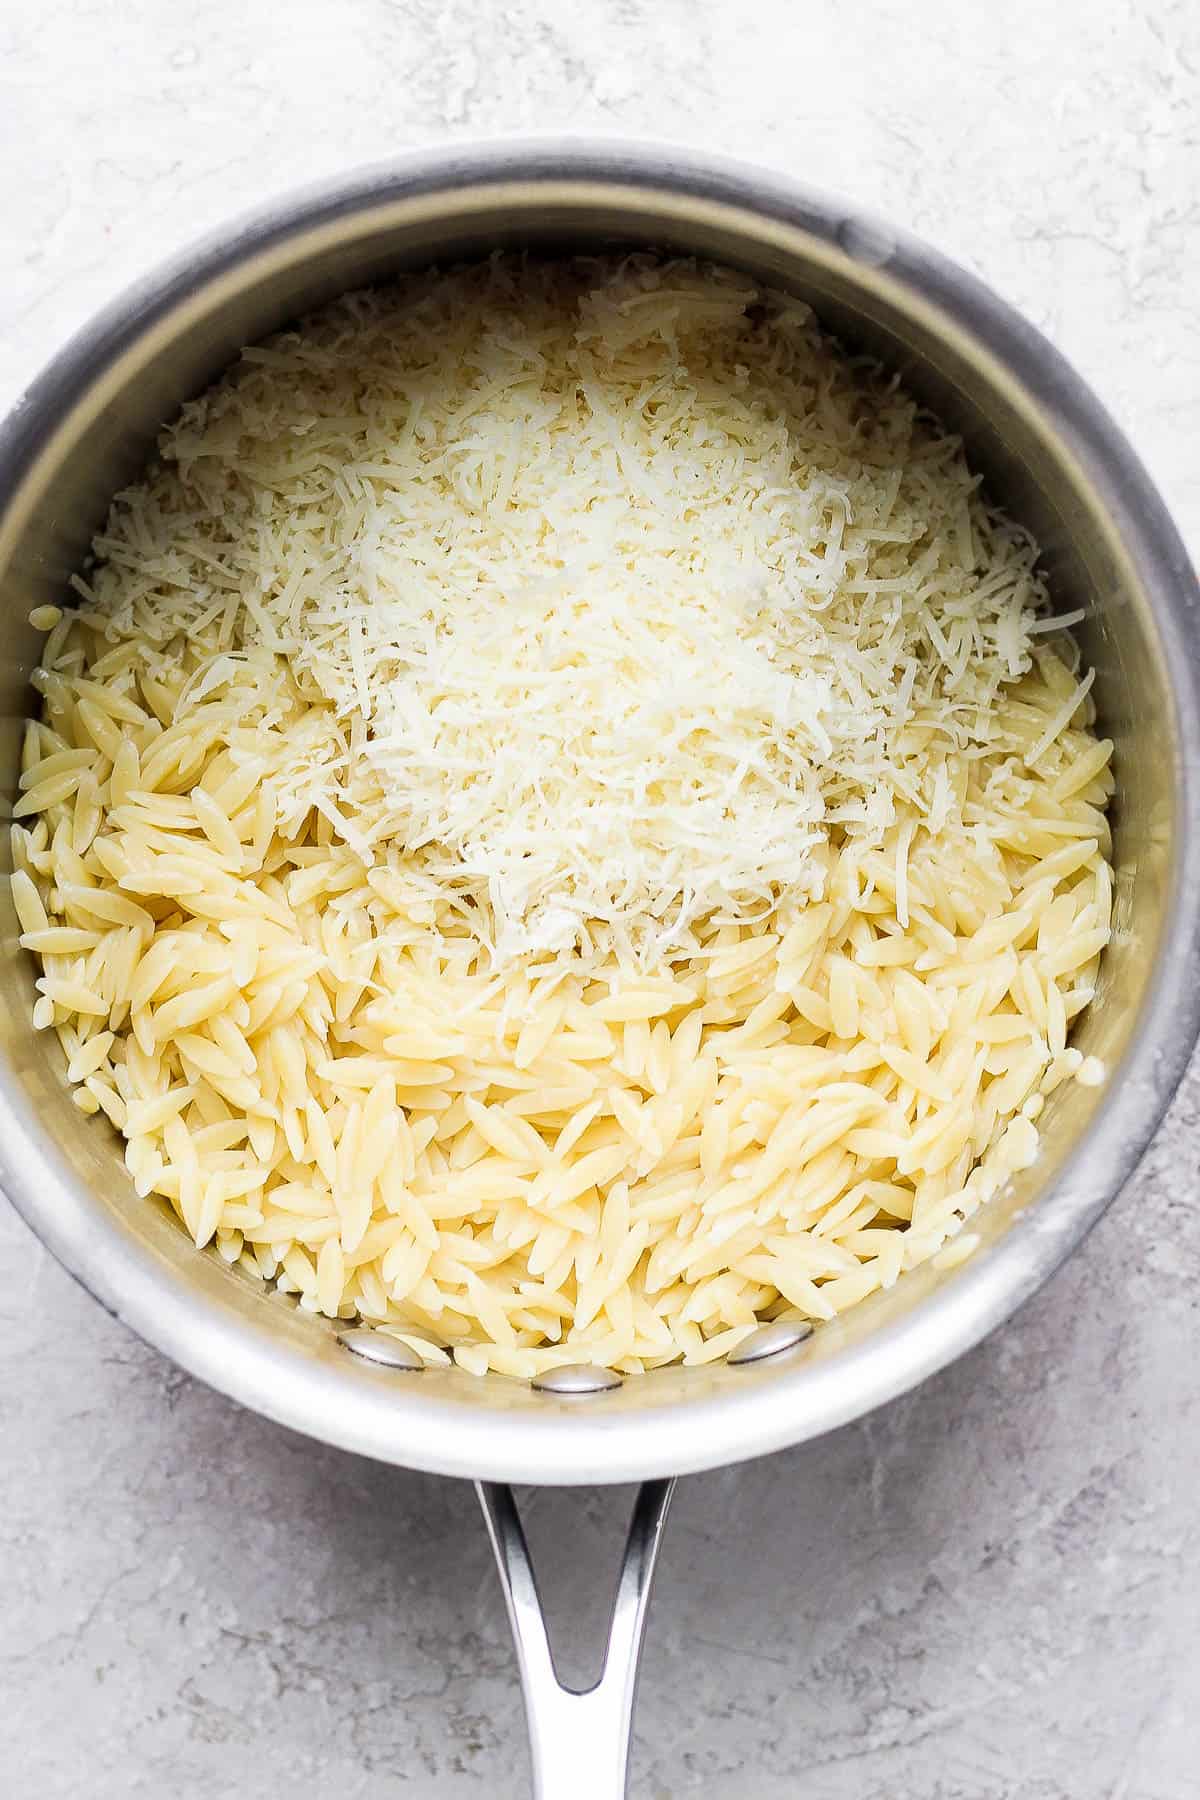 Cooked orzo in a saucepan with parmesan cheese added.